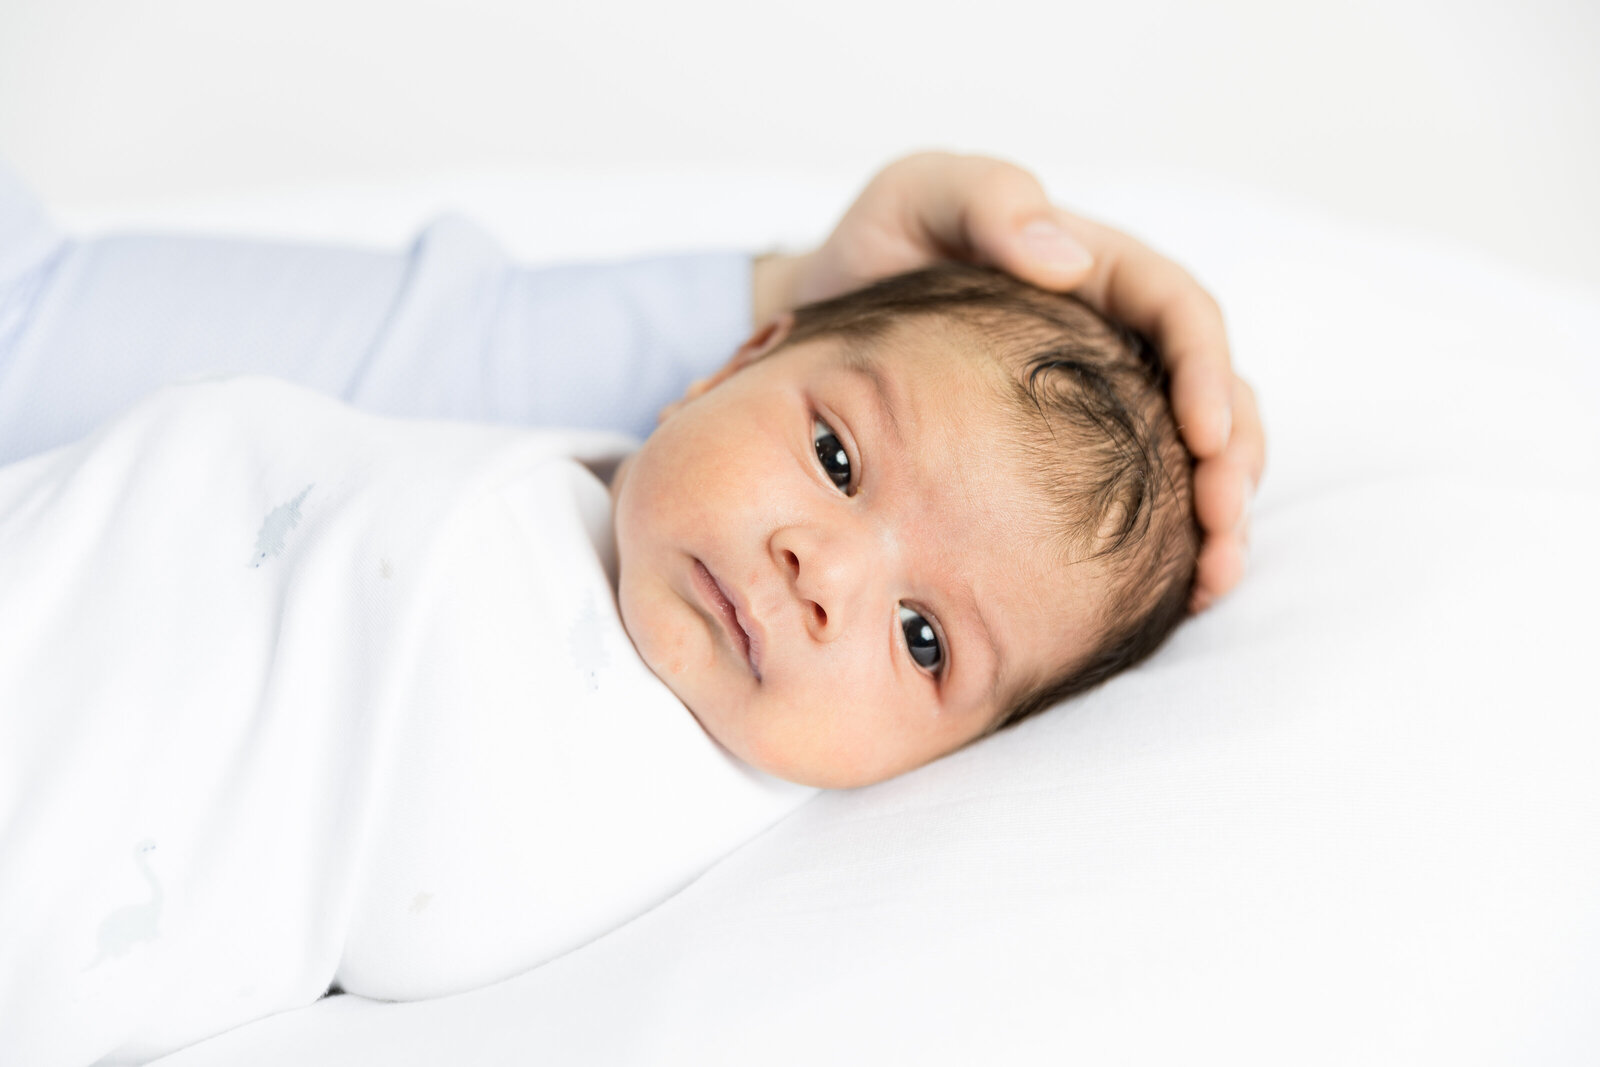 Newborn and Family Photography based in London